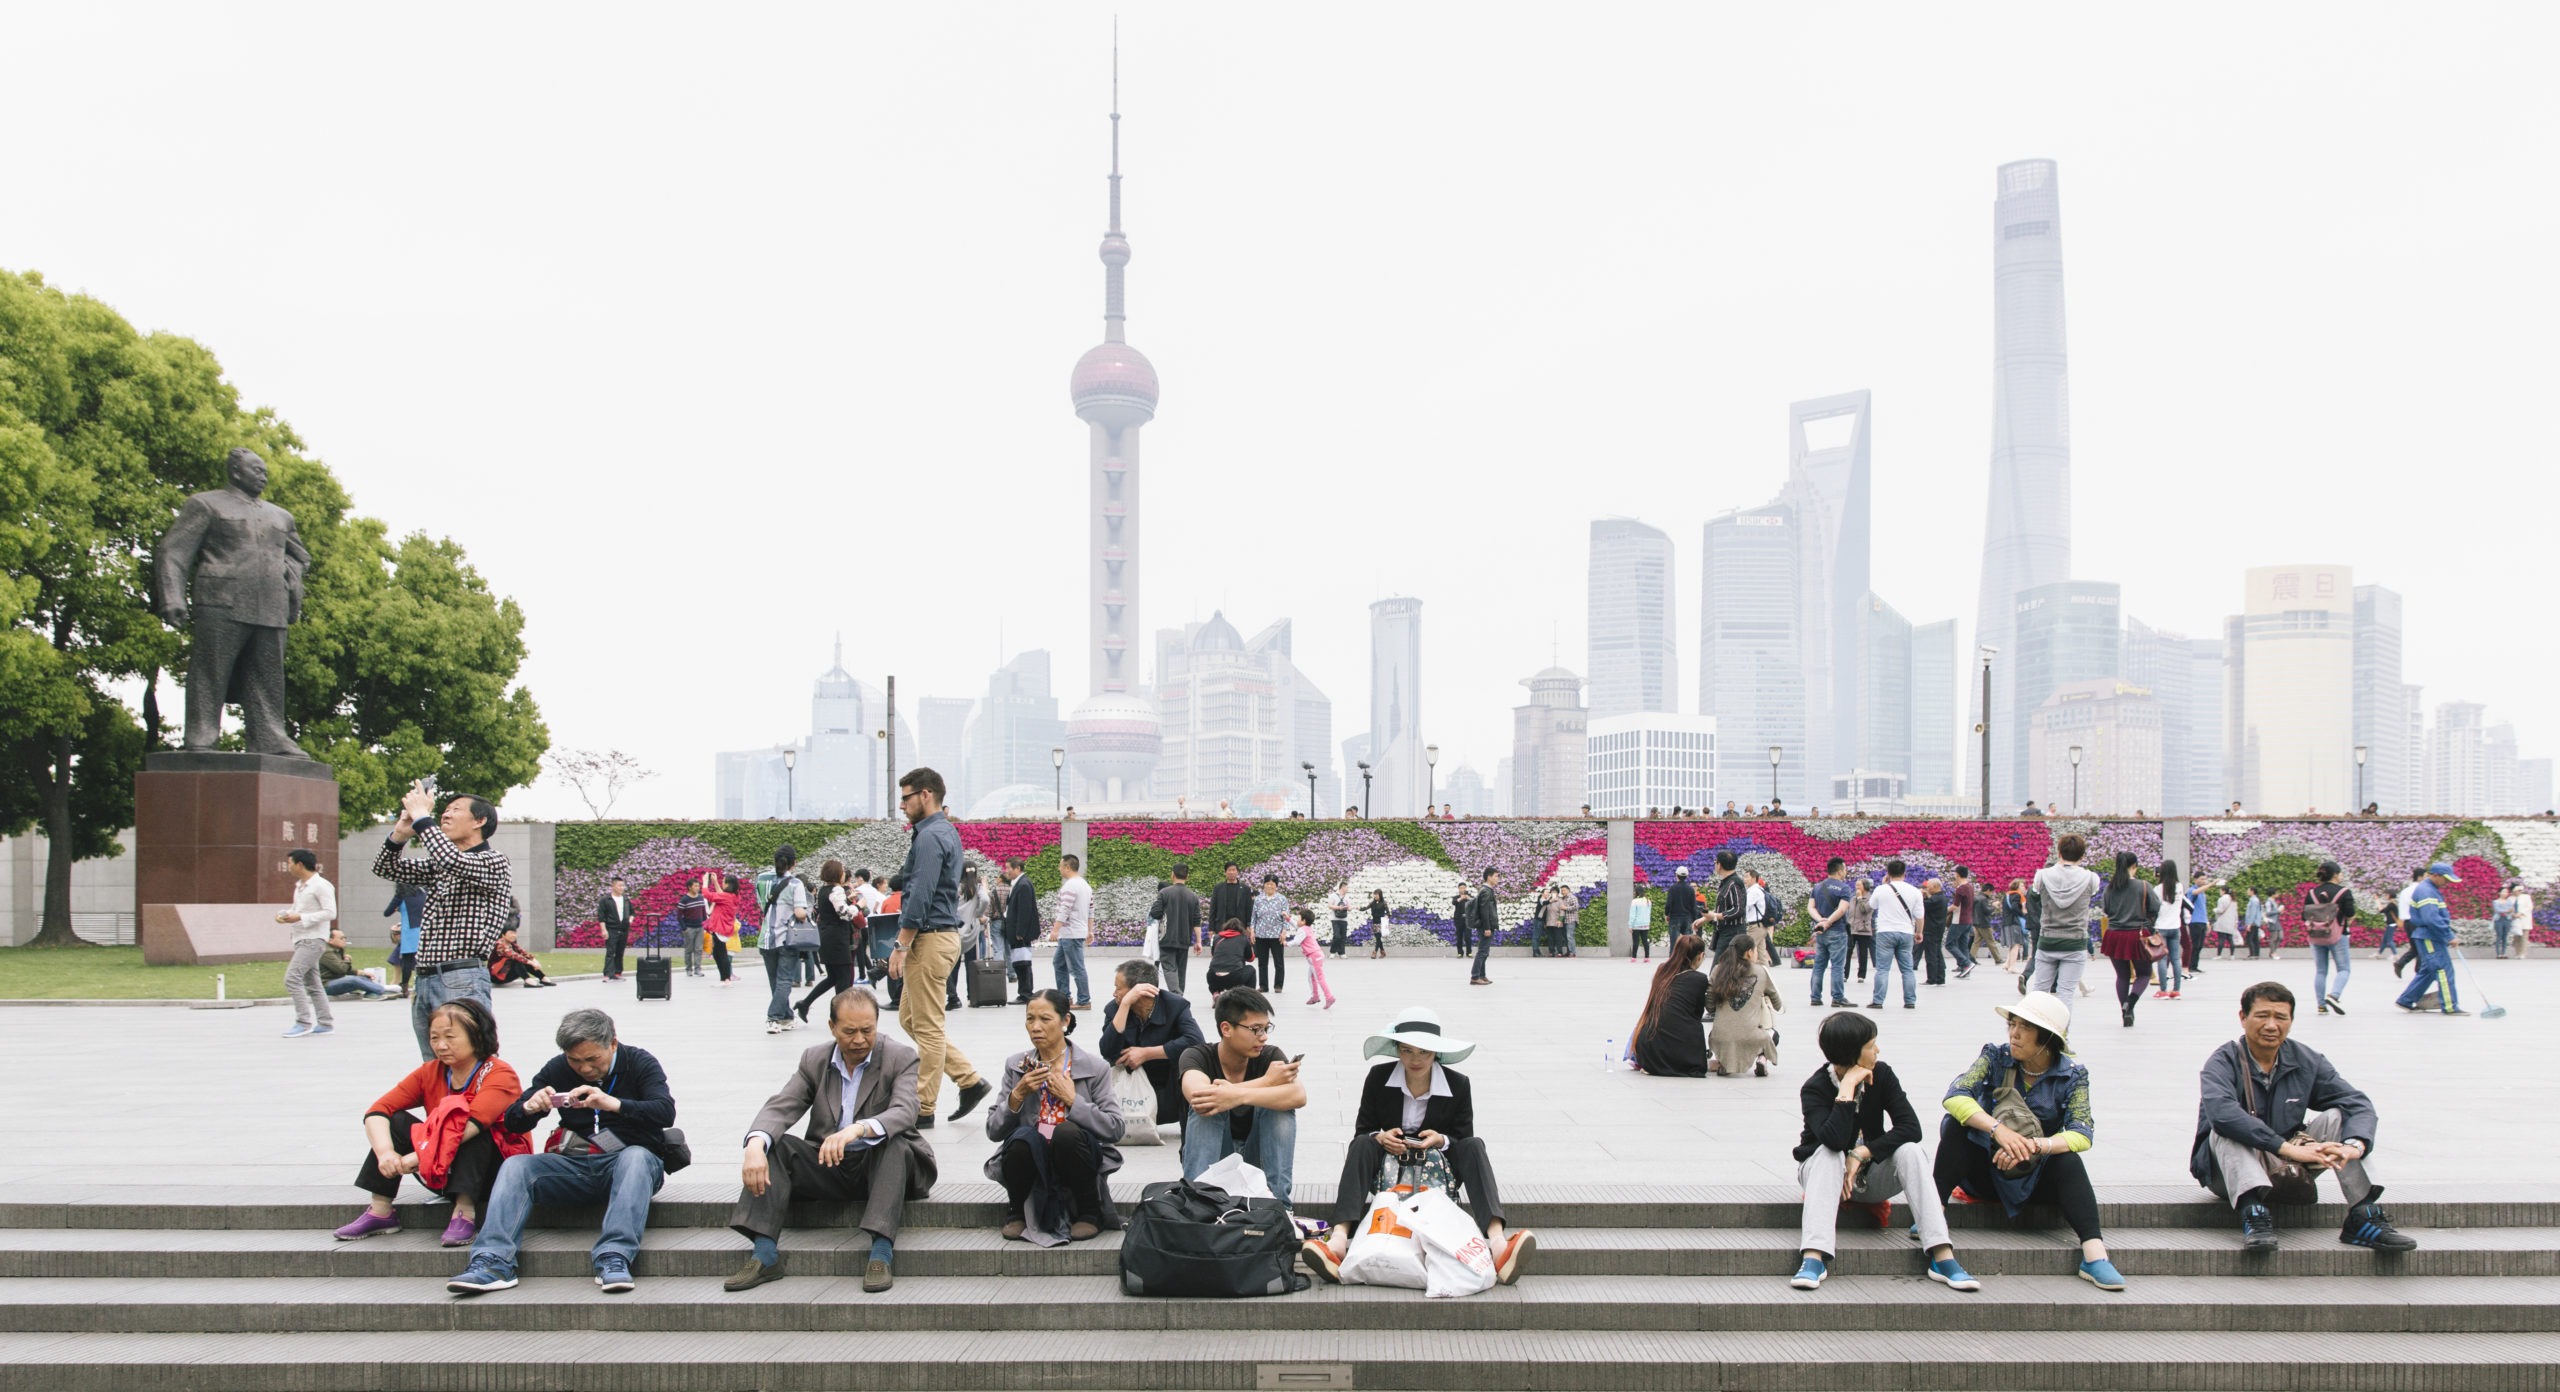 People sitting and walking around an open park area in Shanghai.